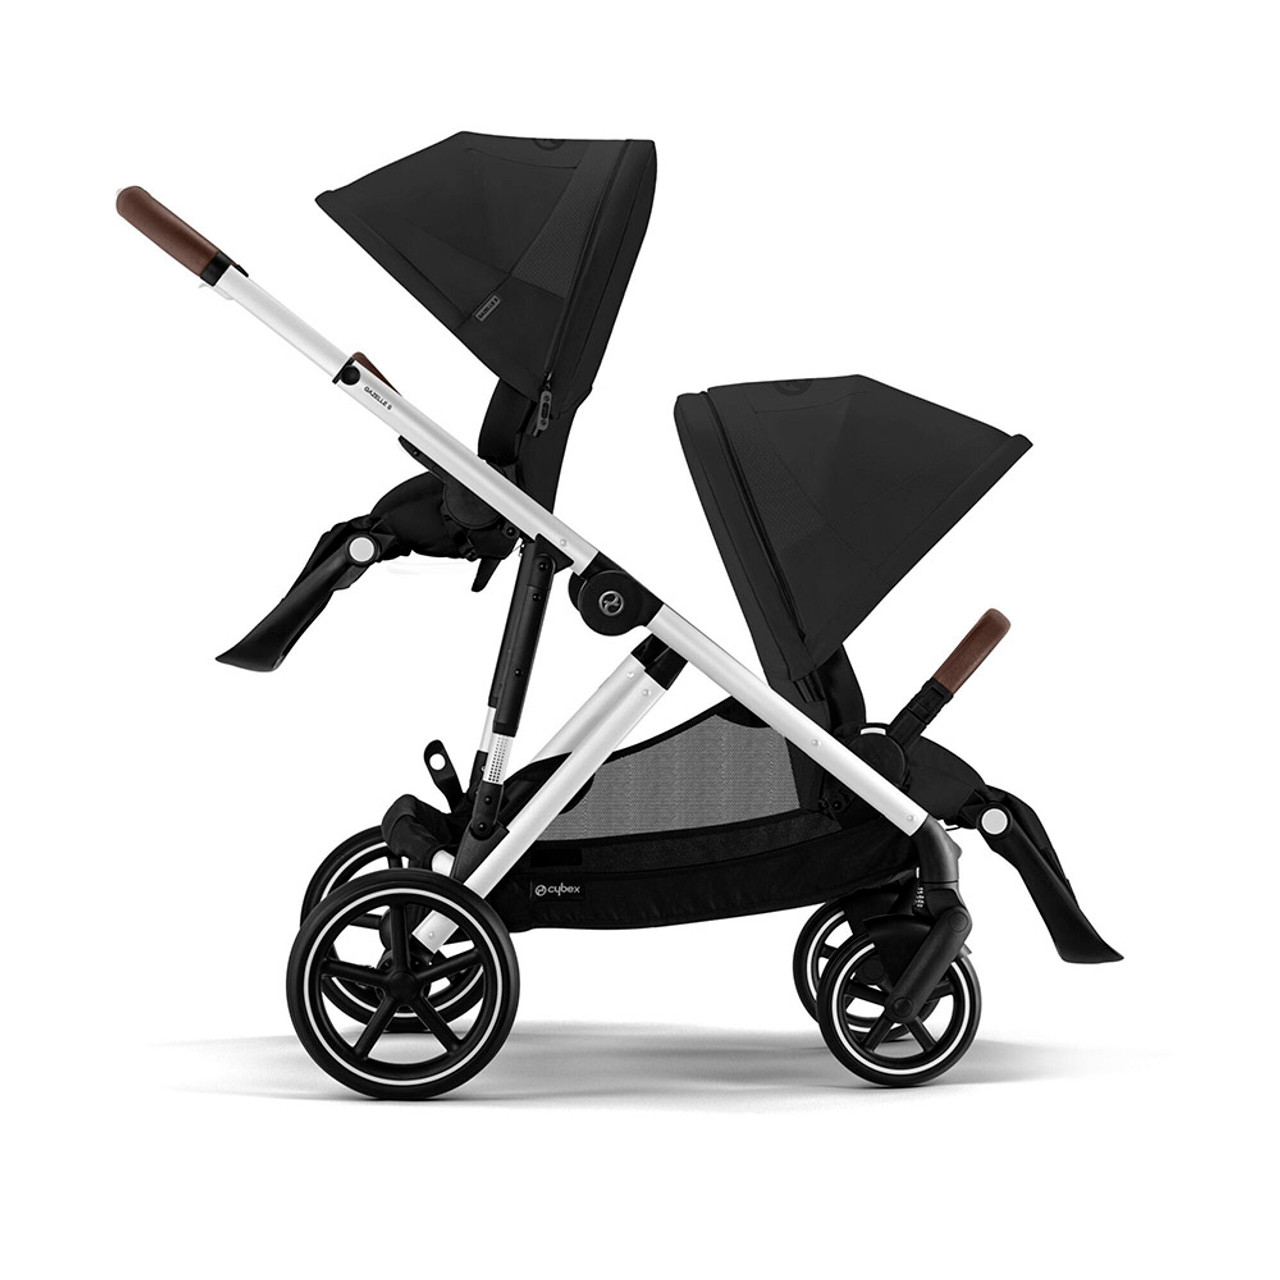 Pushchair Expert introduces the Bugaboo Cameleon 3 